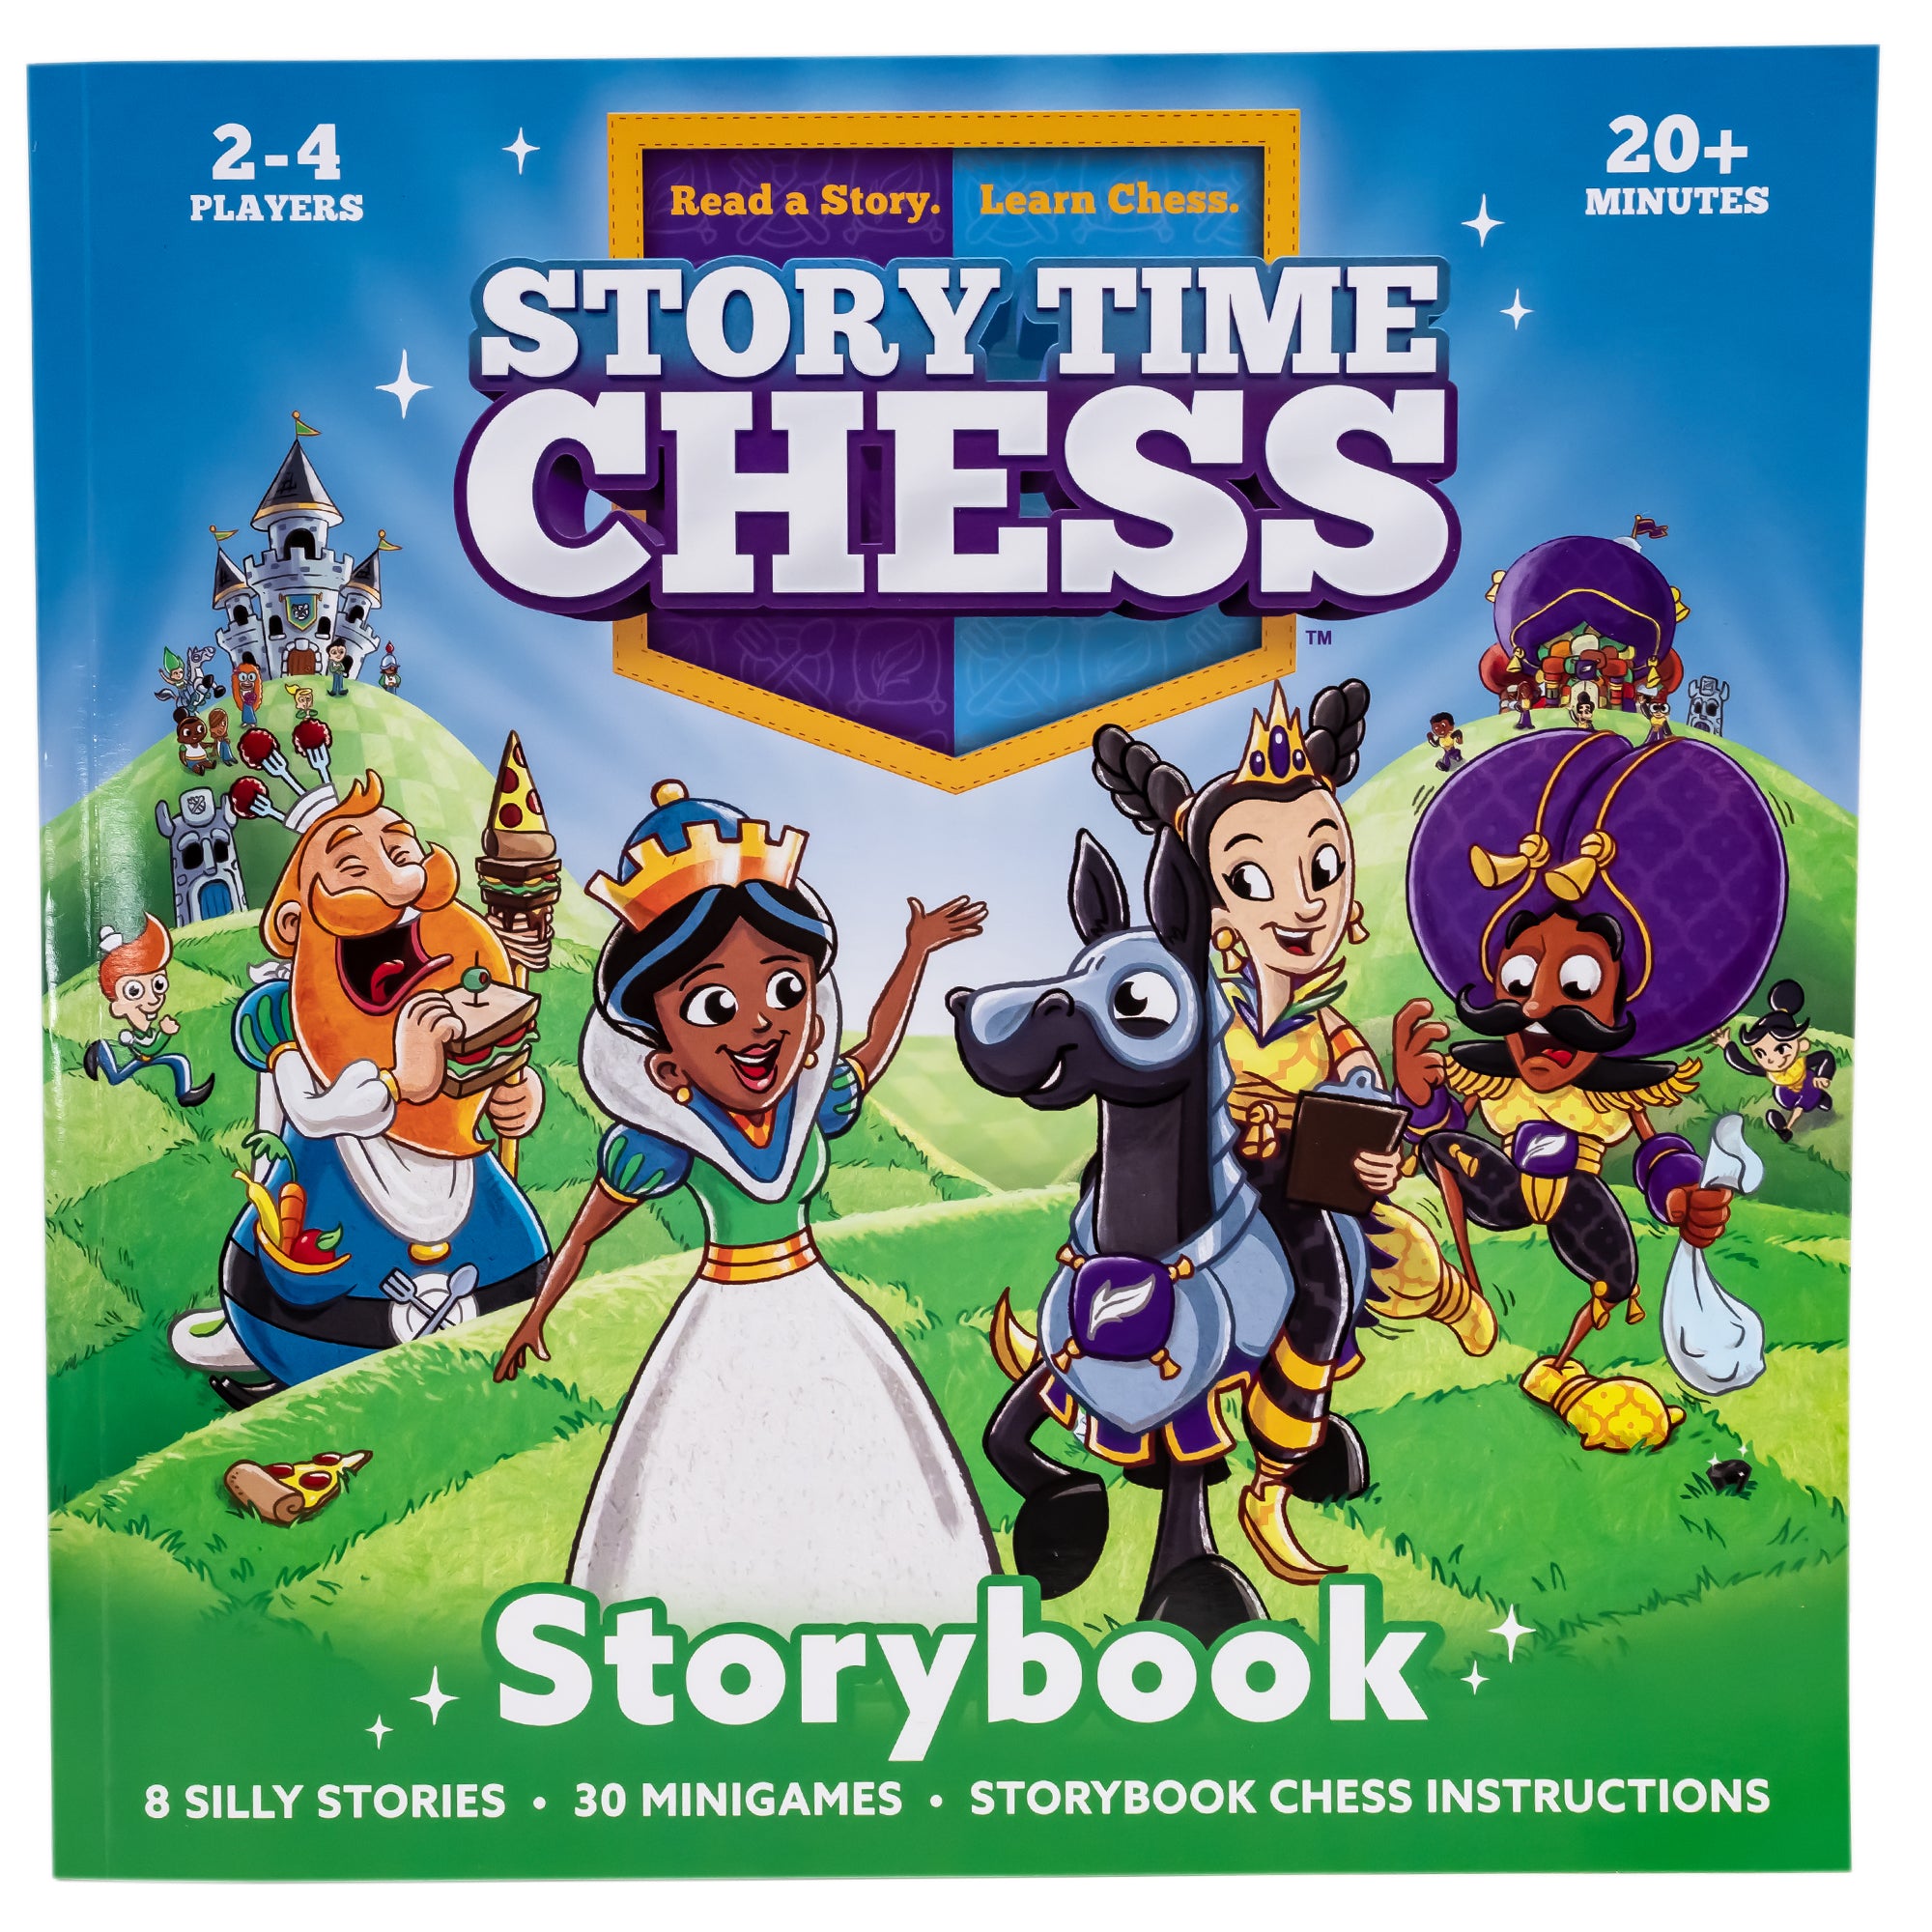 Story Time Chess Storybook cover showing a blue-sky background with green patchwork hills. There is a tall hill on each side with a castle on each. The left castle is standard with spires and flags. The right castle looks like a purple hot air balloon. Many characters are coming out of each castle and running to the front, some smiling, waving, and some riding horses. The 2 Queens are front-middle and smiling at each other. The left Queen is on a horse. Behind them are the Kings.